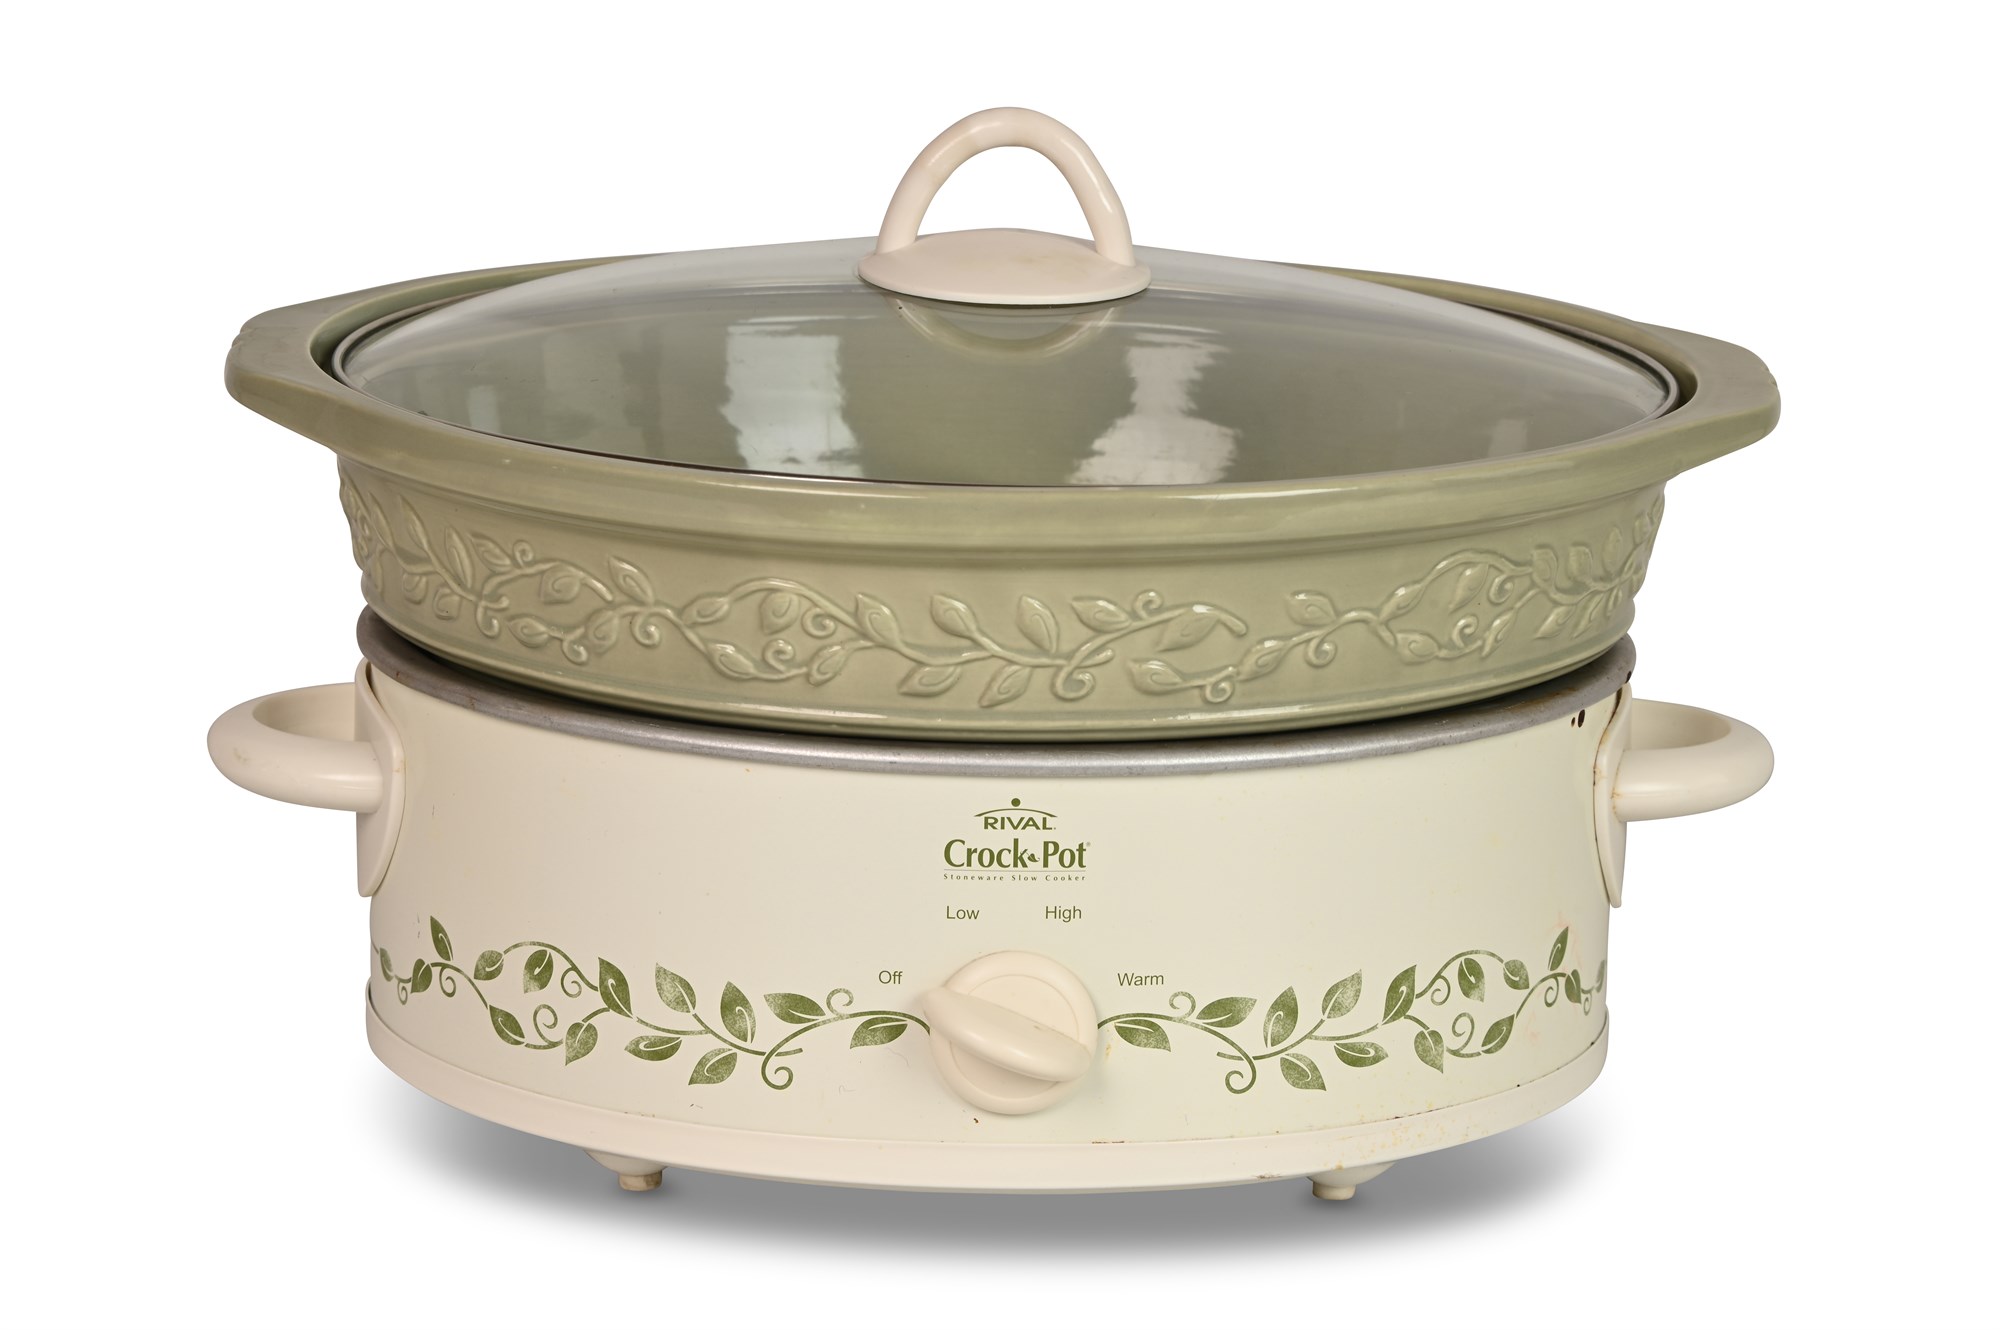 Sold at Auction: Like New Rival Slow Cooker Oval Crock Pot